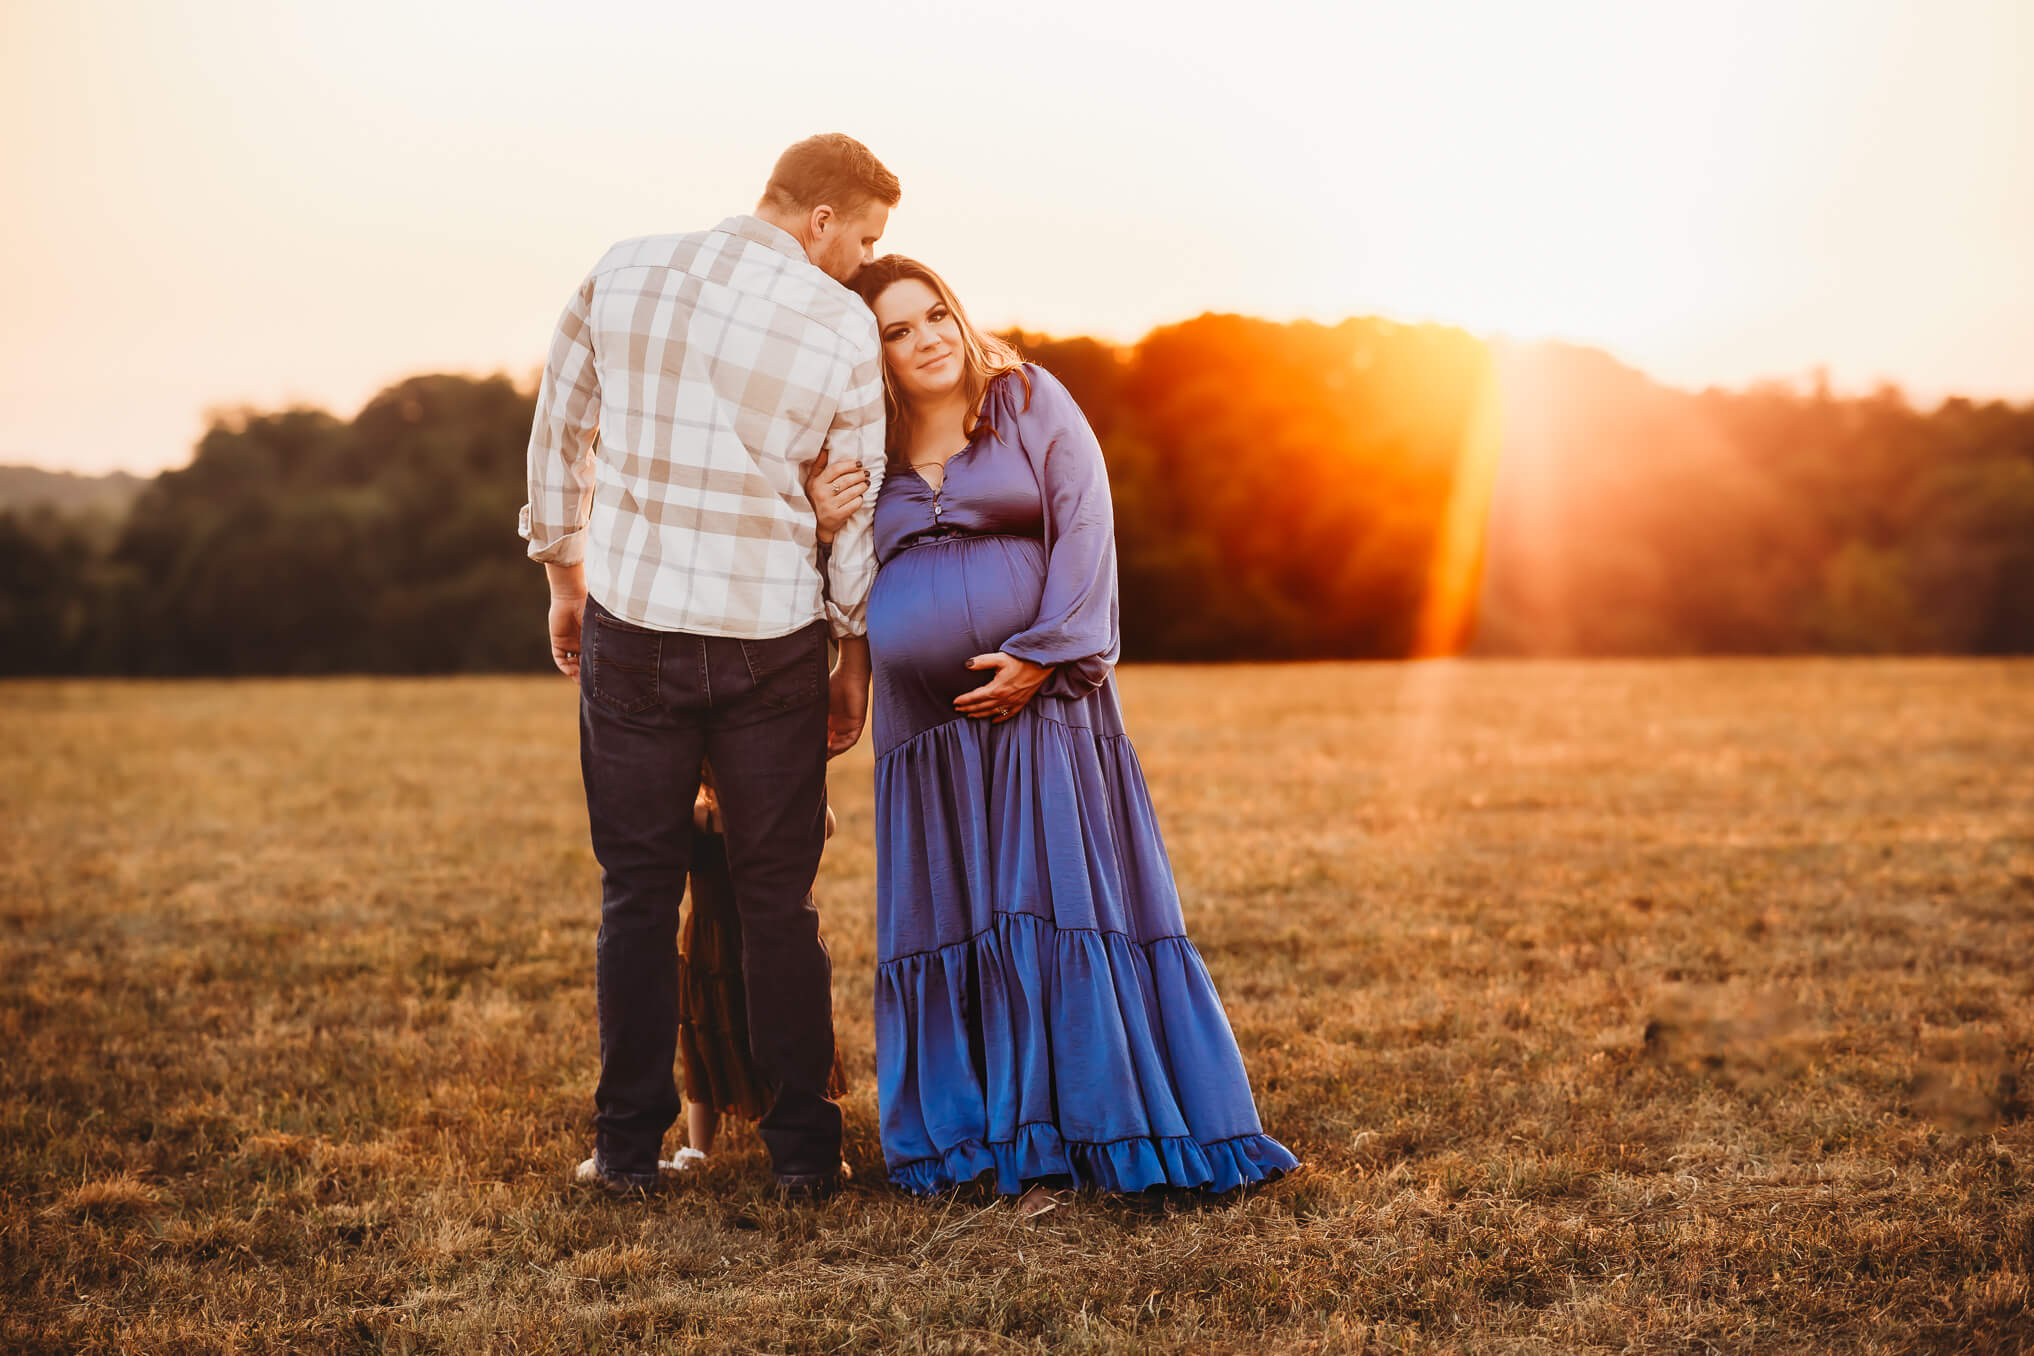 Husband and wife in sunset glowing maternity photo